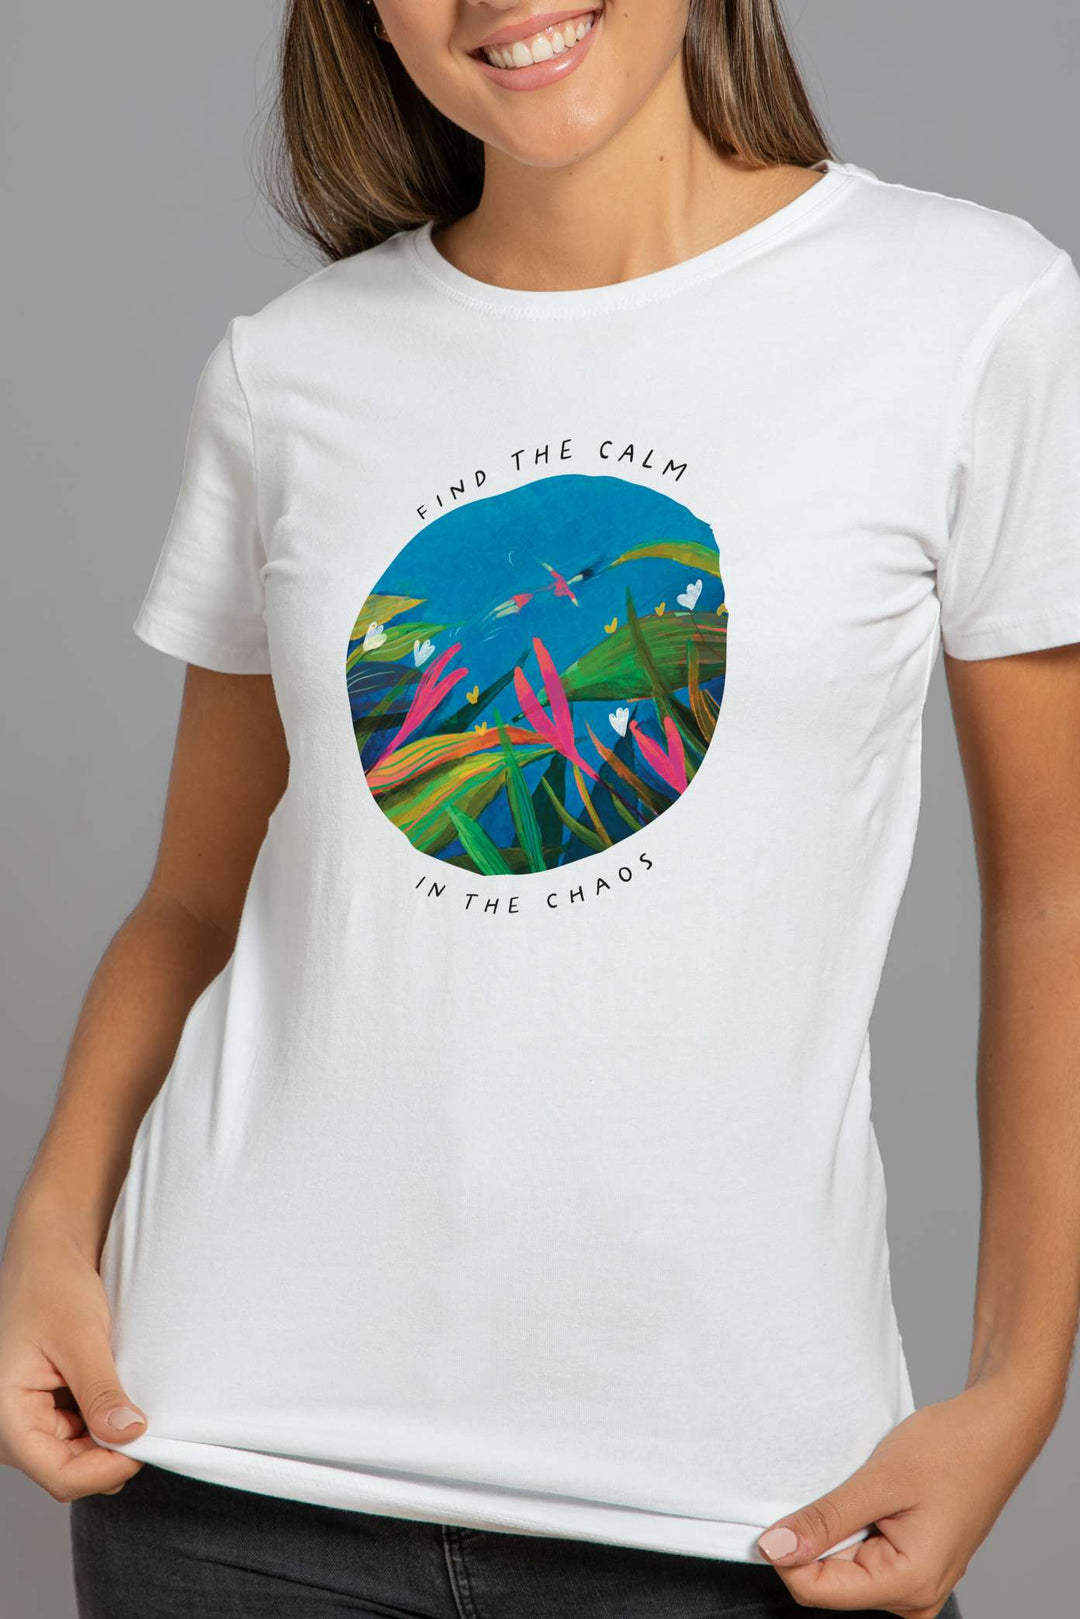 Find The Calm T-shirt